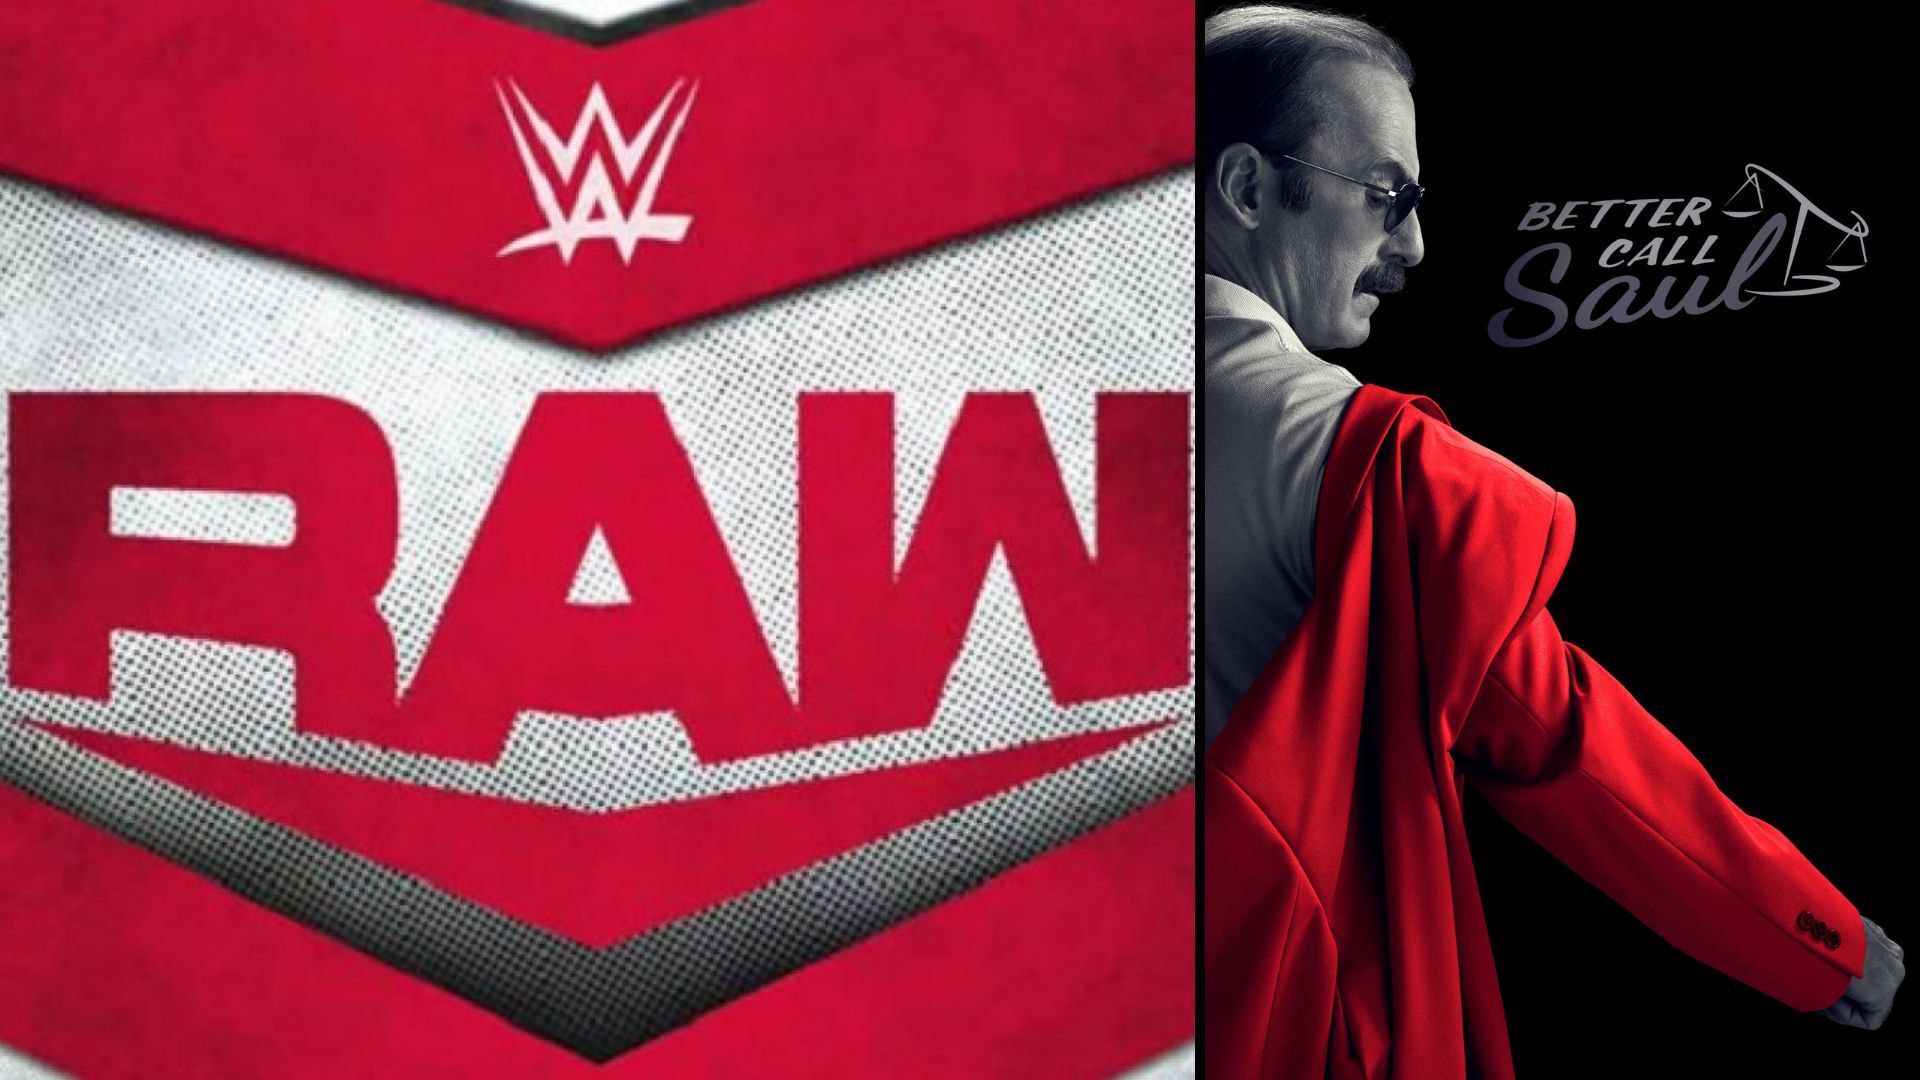 WWE RAW outperforms Better Call Saul&#039;s last episode